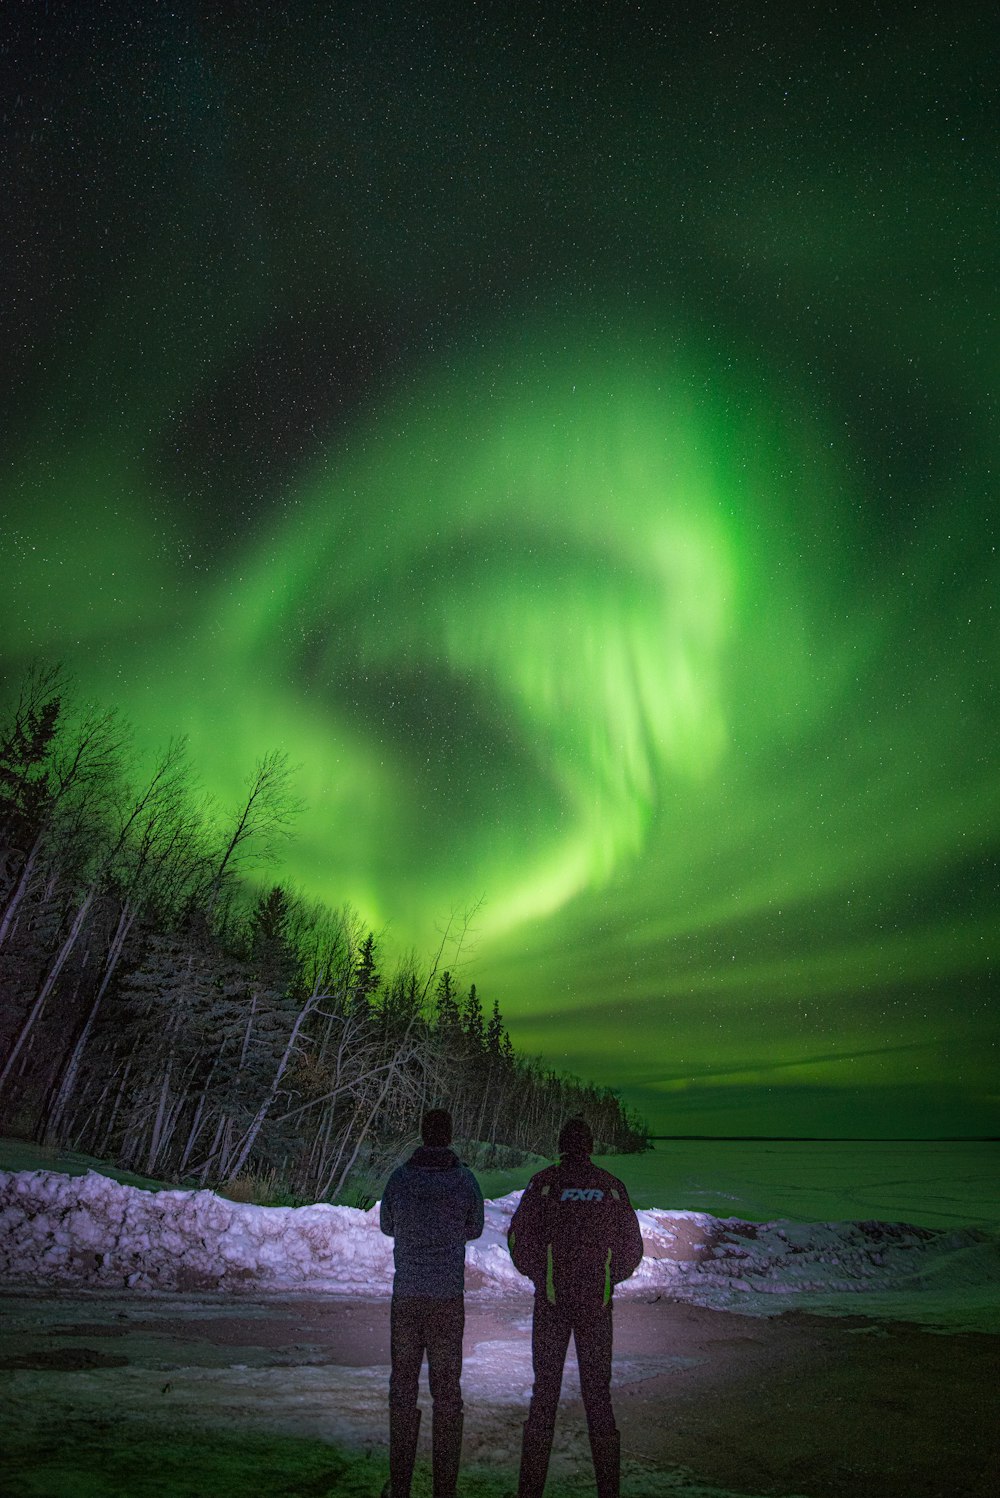 two people standing in front of a green aurora bore